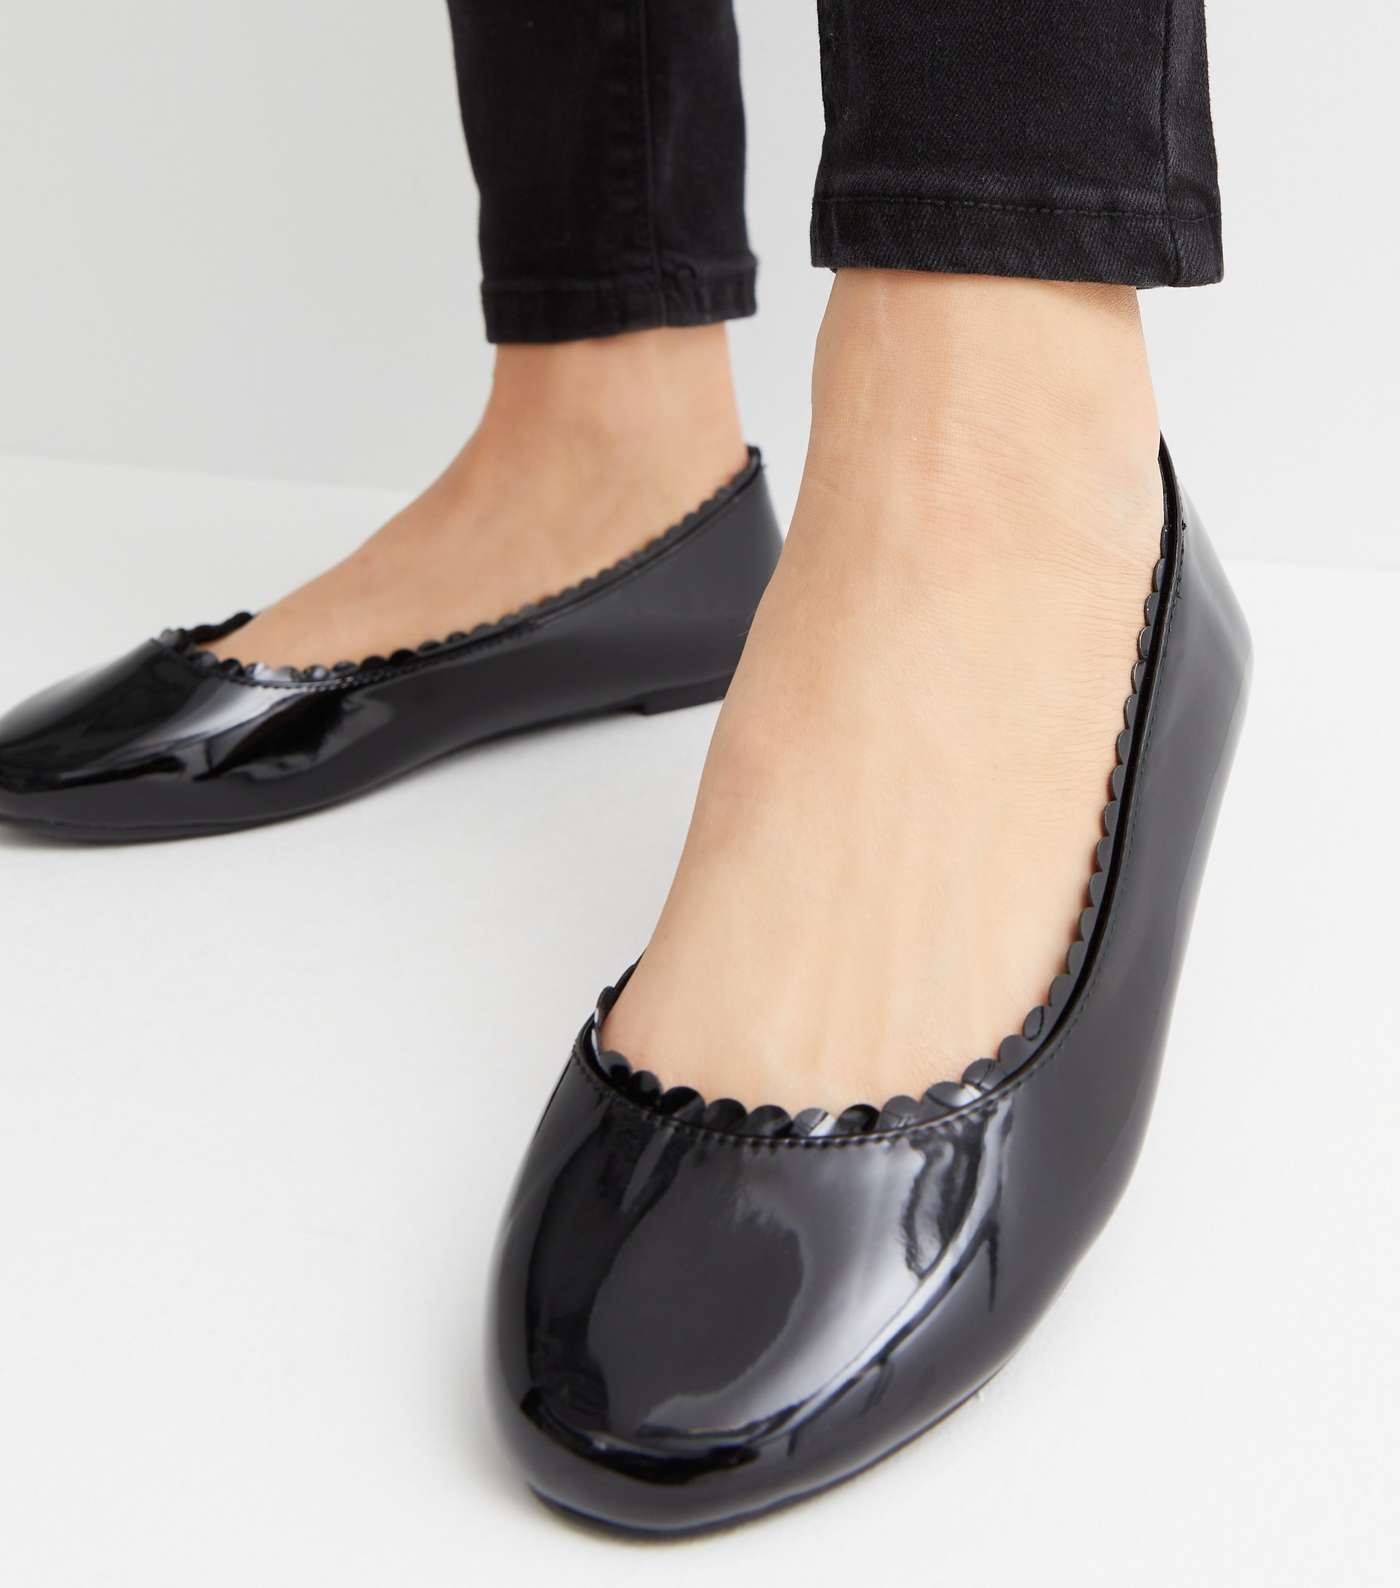 Extra Wide Fit Black Patent Scallop Ballerina Pumps Image 2